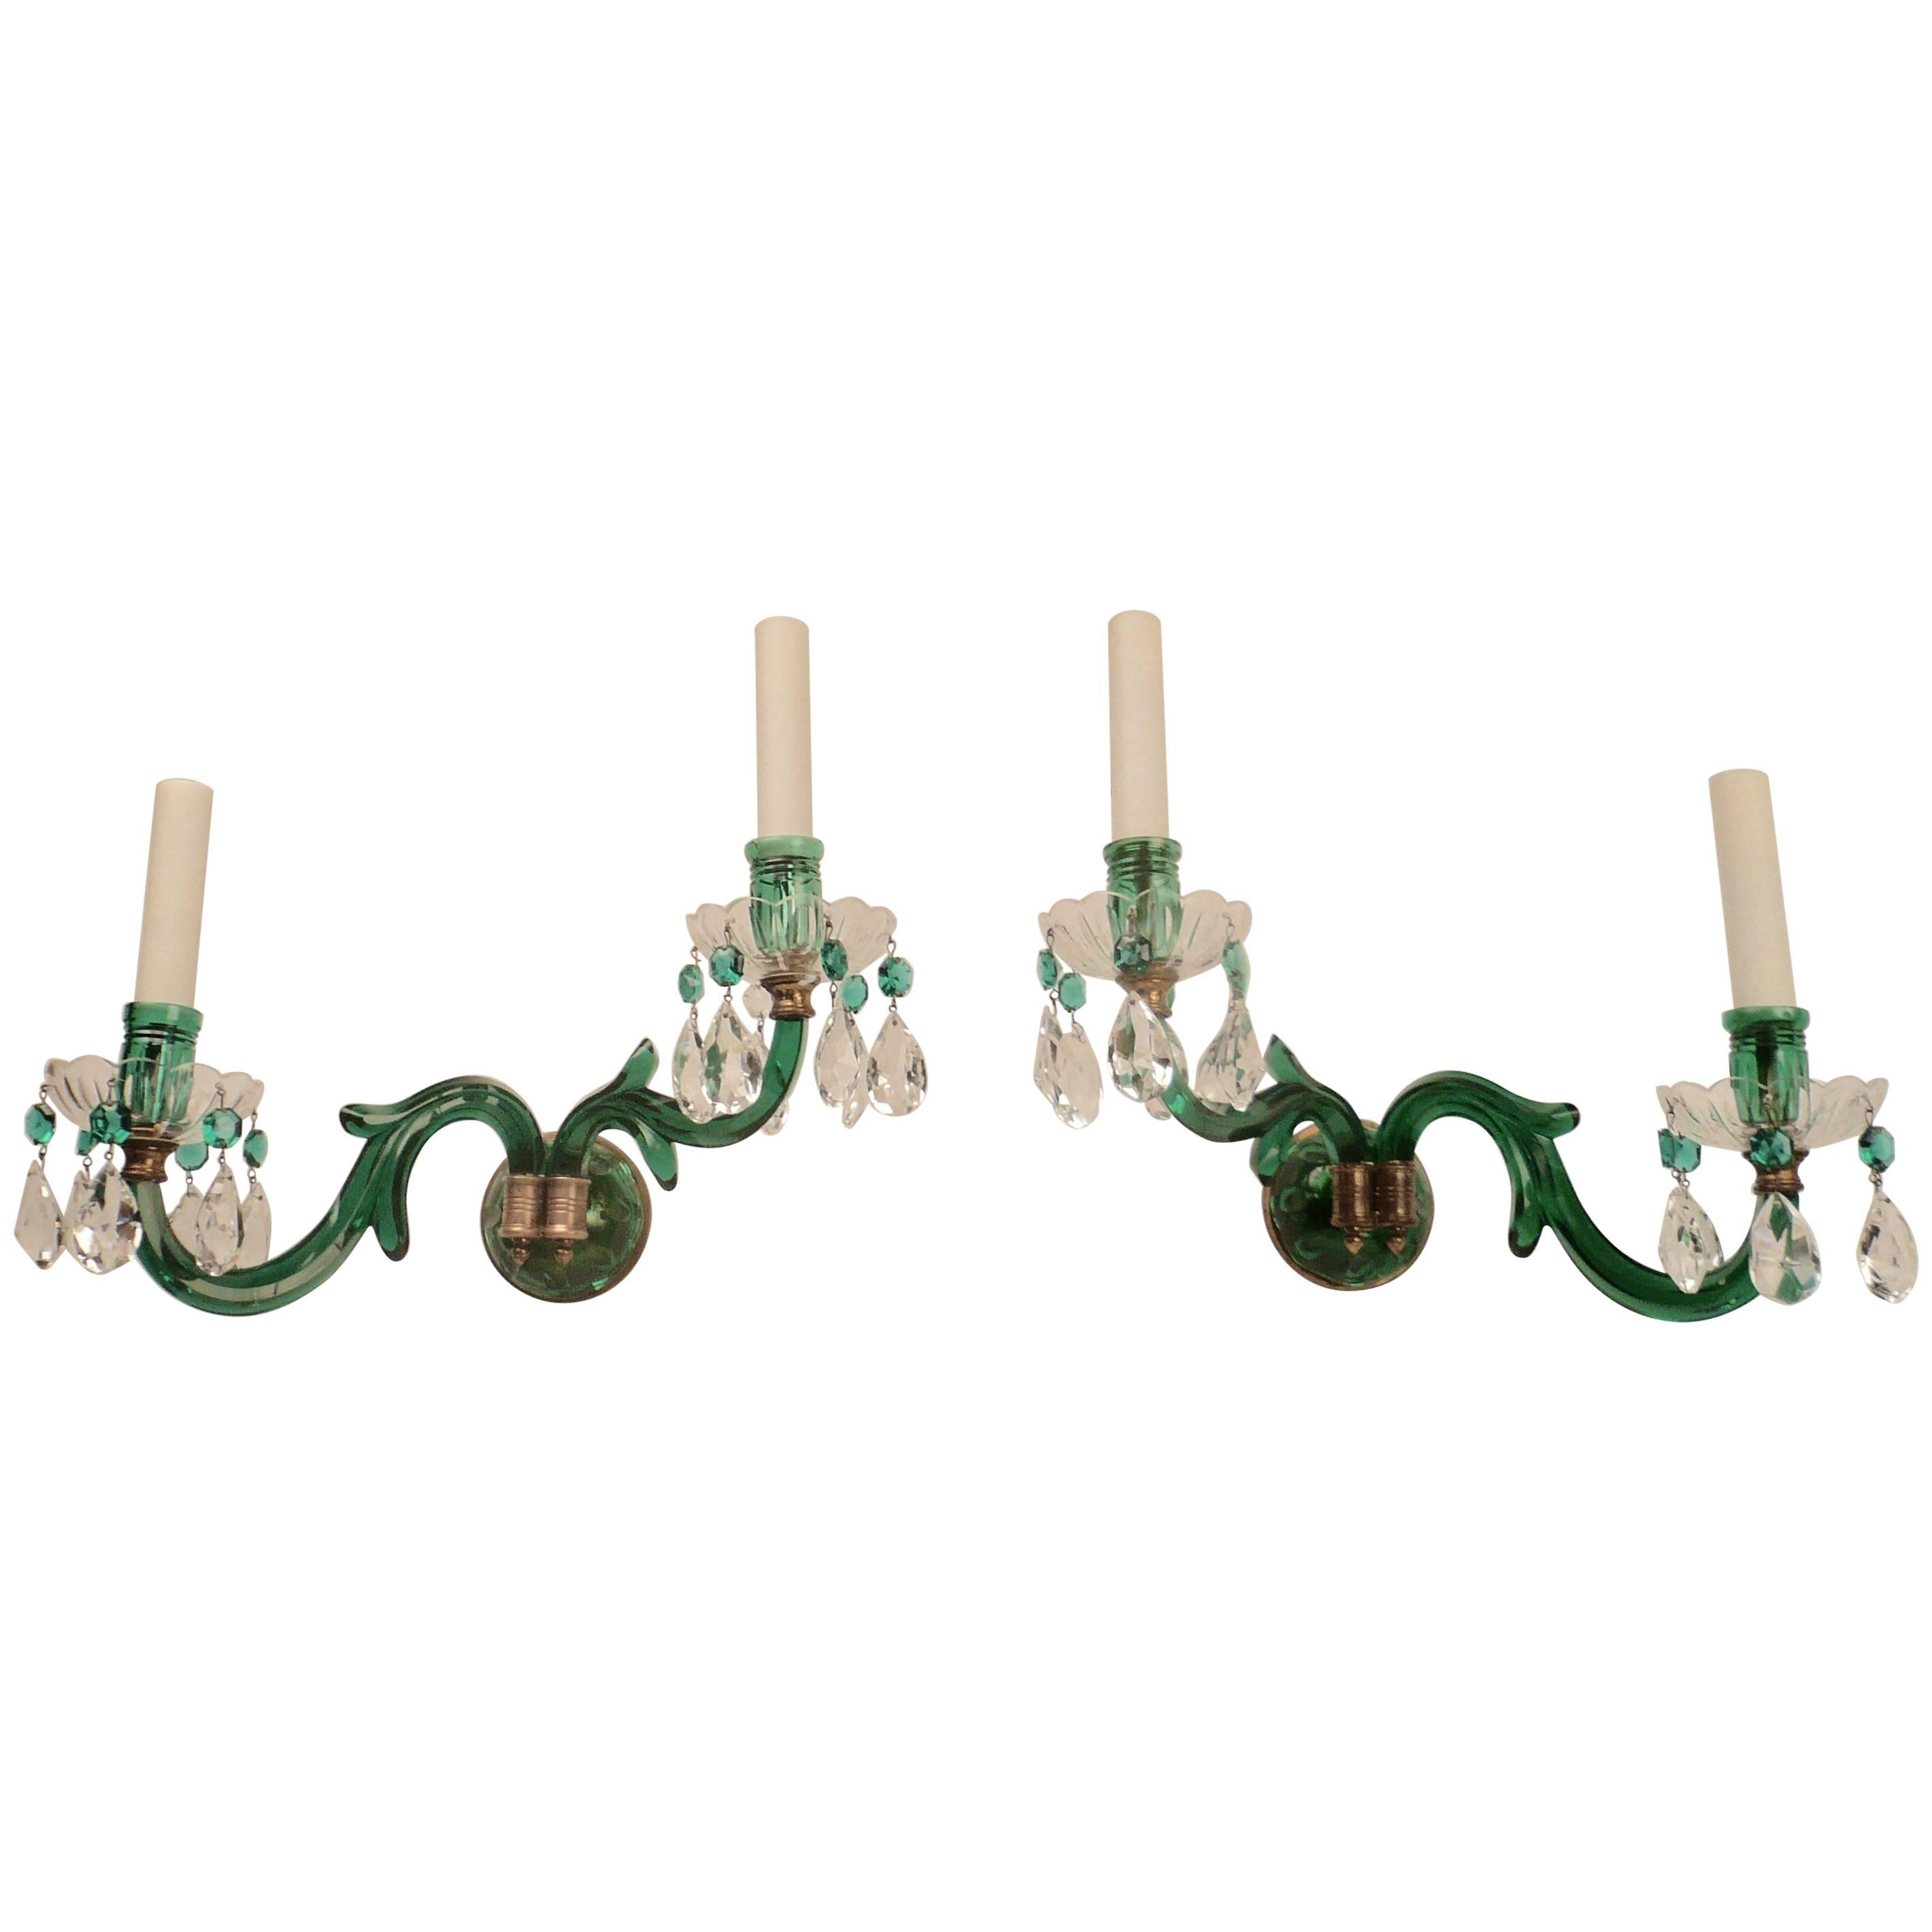 Pair of English Mid-19th Century Emerald Green Cut Crystal Sconces